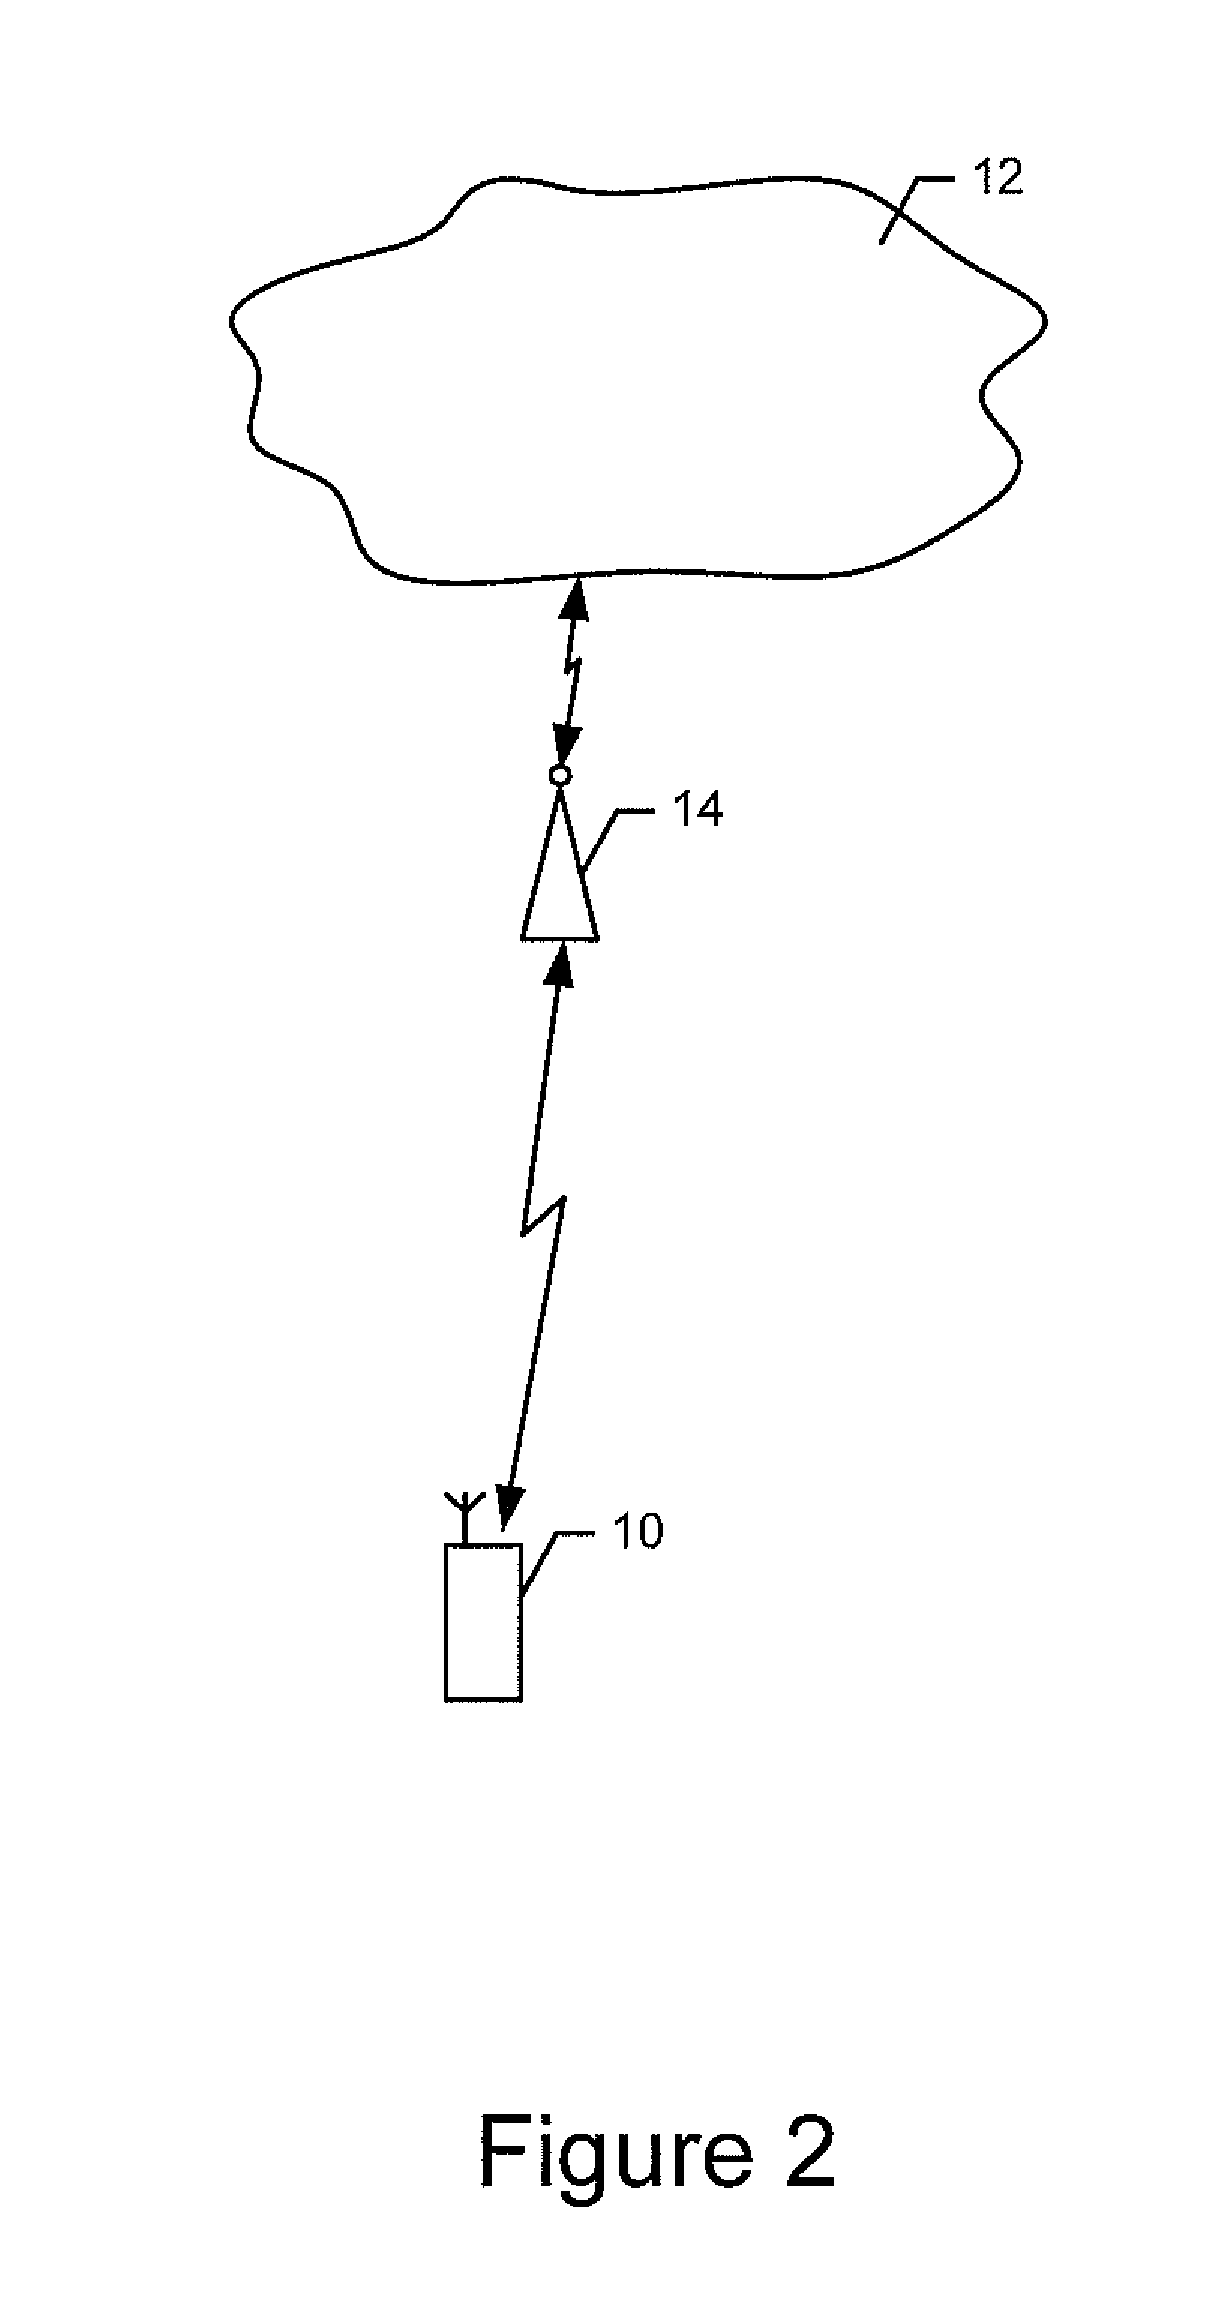 Method and Apparatus for Establishing a Time-Frequency Reference Signal Pattern Configuration in a Carrier Extension or Carrier Segment